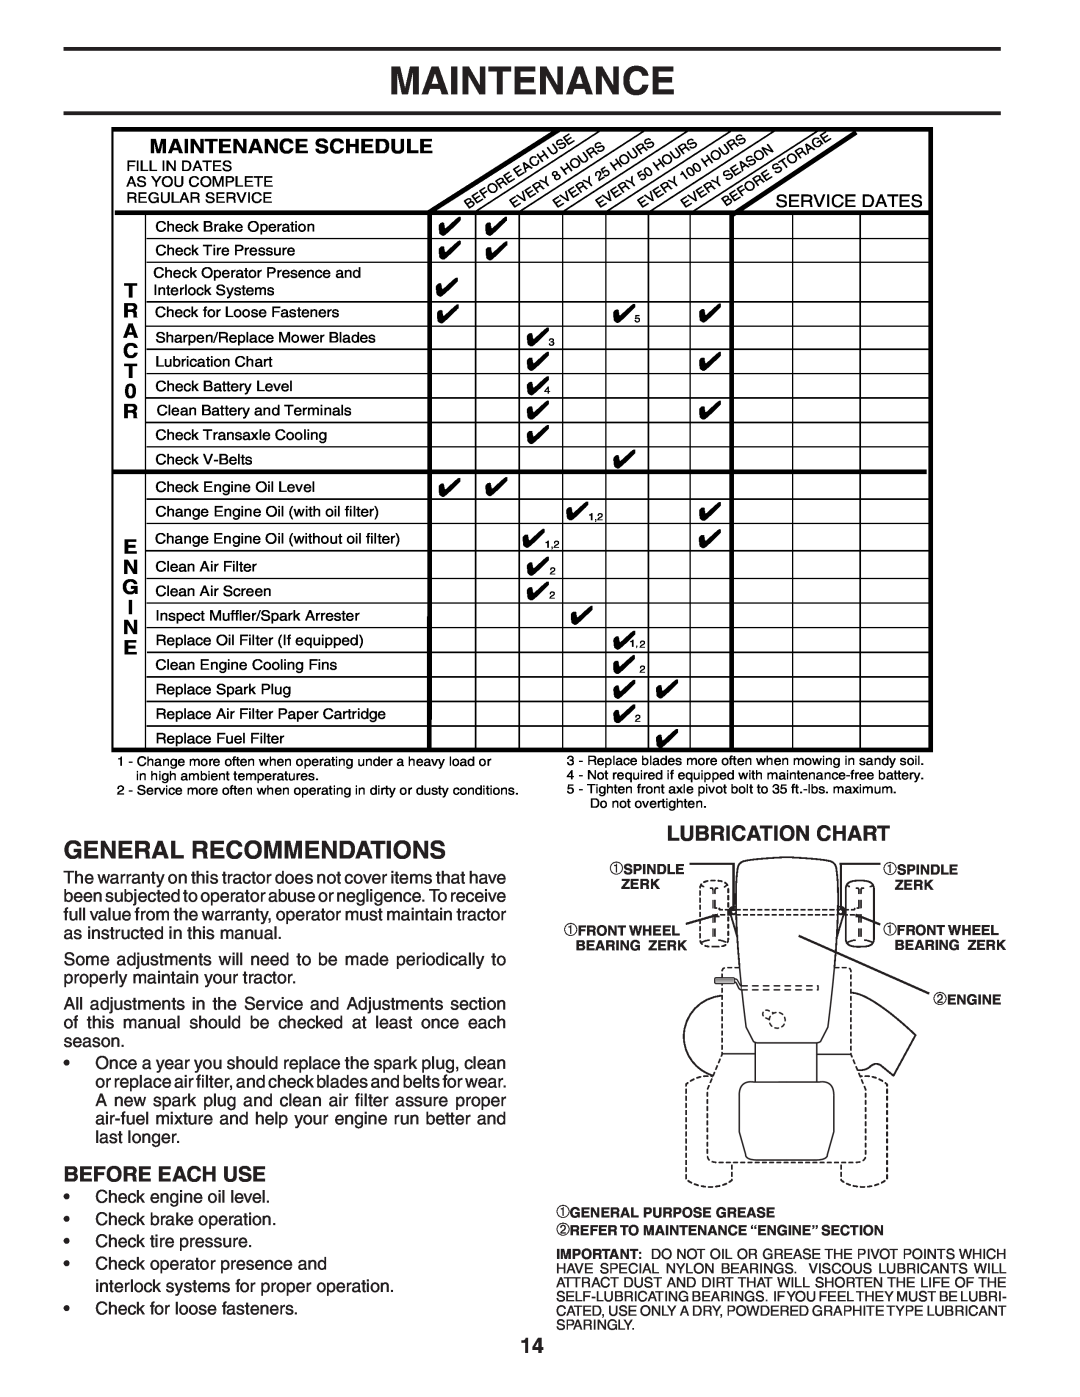 Weed Eater WE1538C, 186778 manual General Recommendations, Lubrication Chart, Before Each Use, Maintenance Schedule 